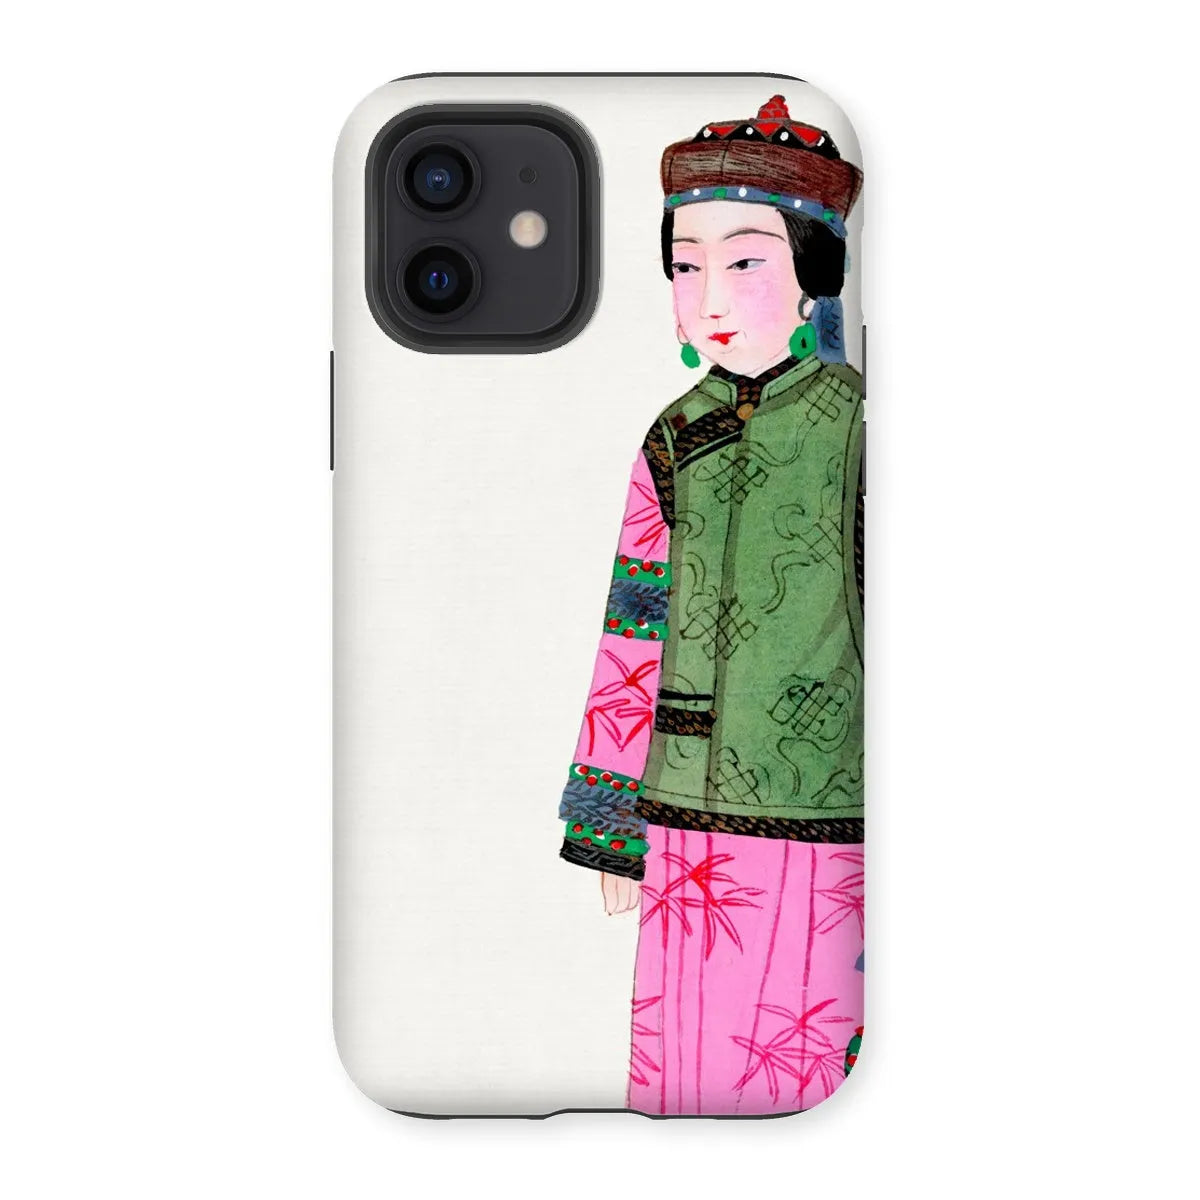 Noblewoman In Winter - Chinese Aesthetic Art Phone Case - Iphone 12 / Matte - Mobile Phone Cases - Aesthetic Art